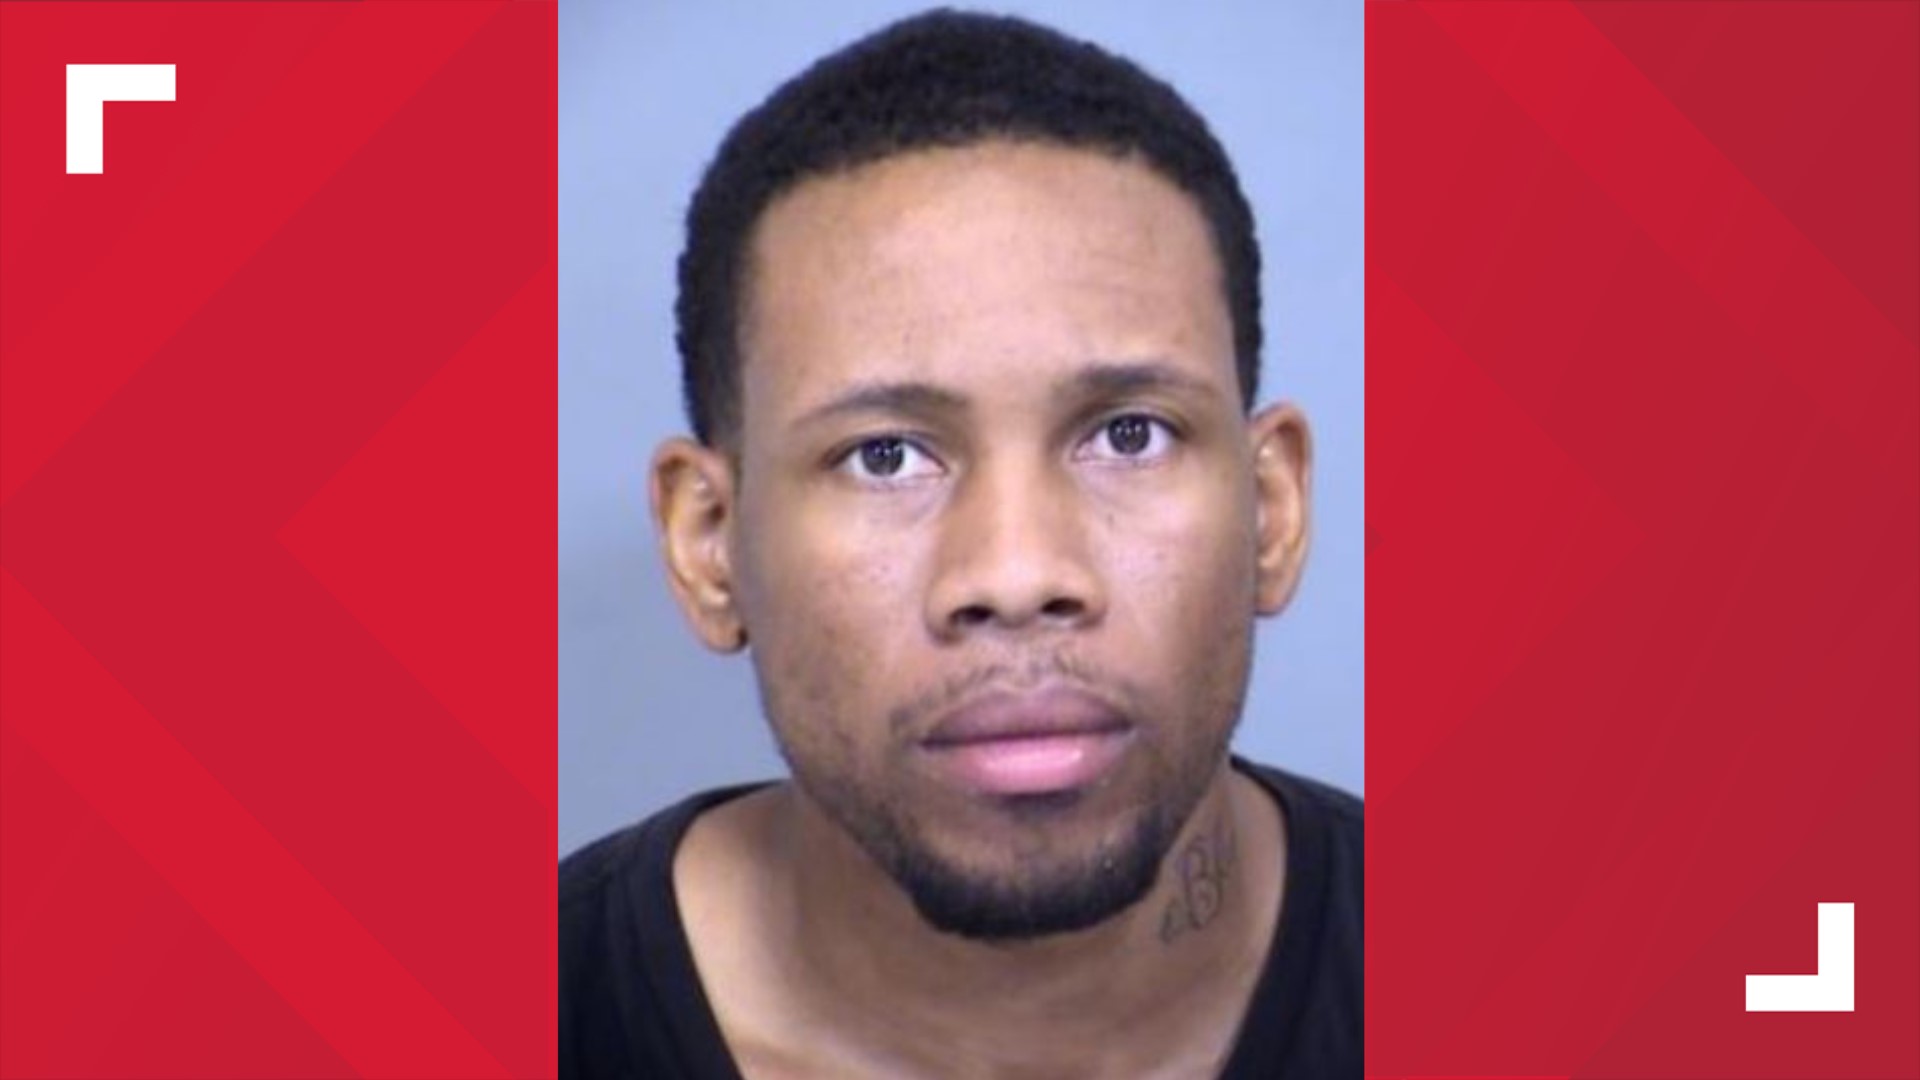 Phoenix police have arrested 30-year-old Andre Daniels and charged him with murdering Shavone Robinson. He's also charged with child abuse.